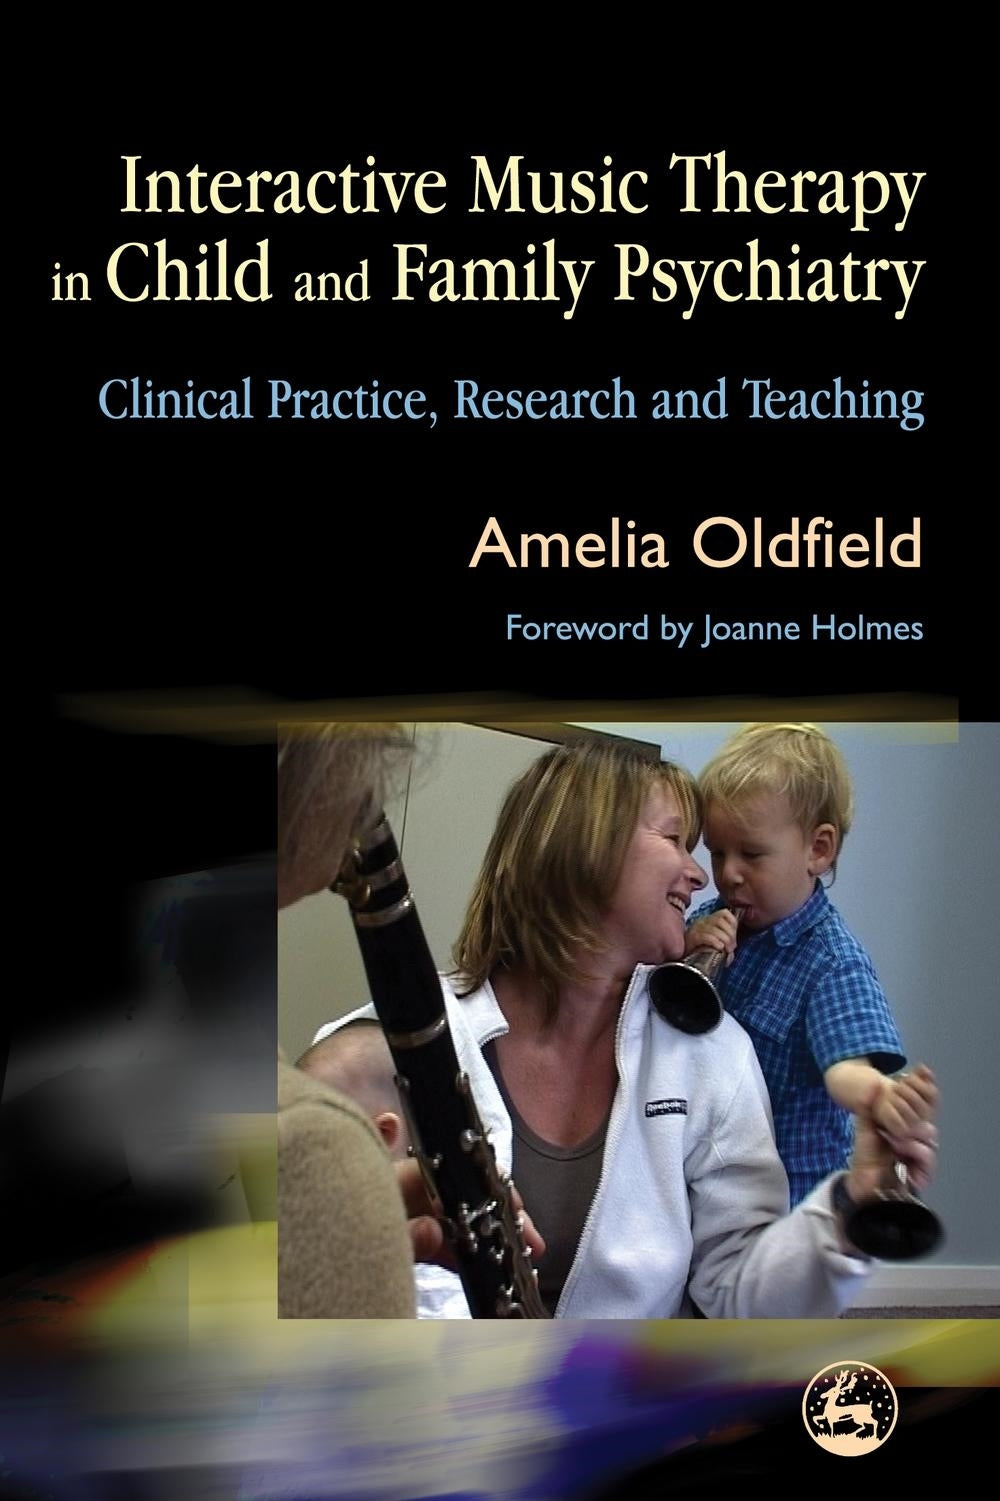 Interactive Music Therapy in Child and Family Psychiatry by Jo Holmes, Amelia Oldfield